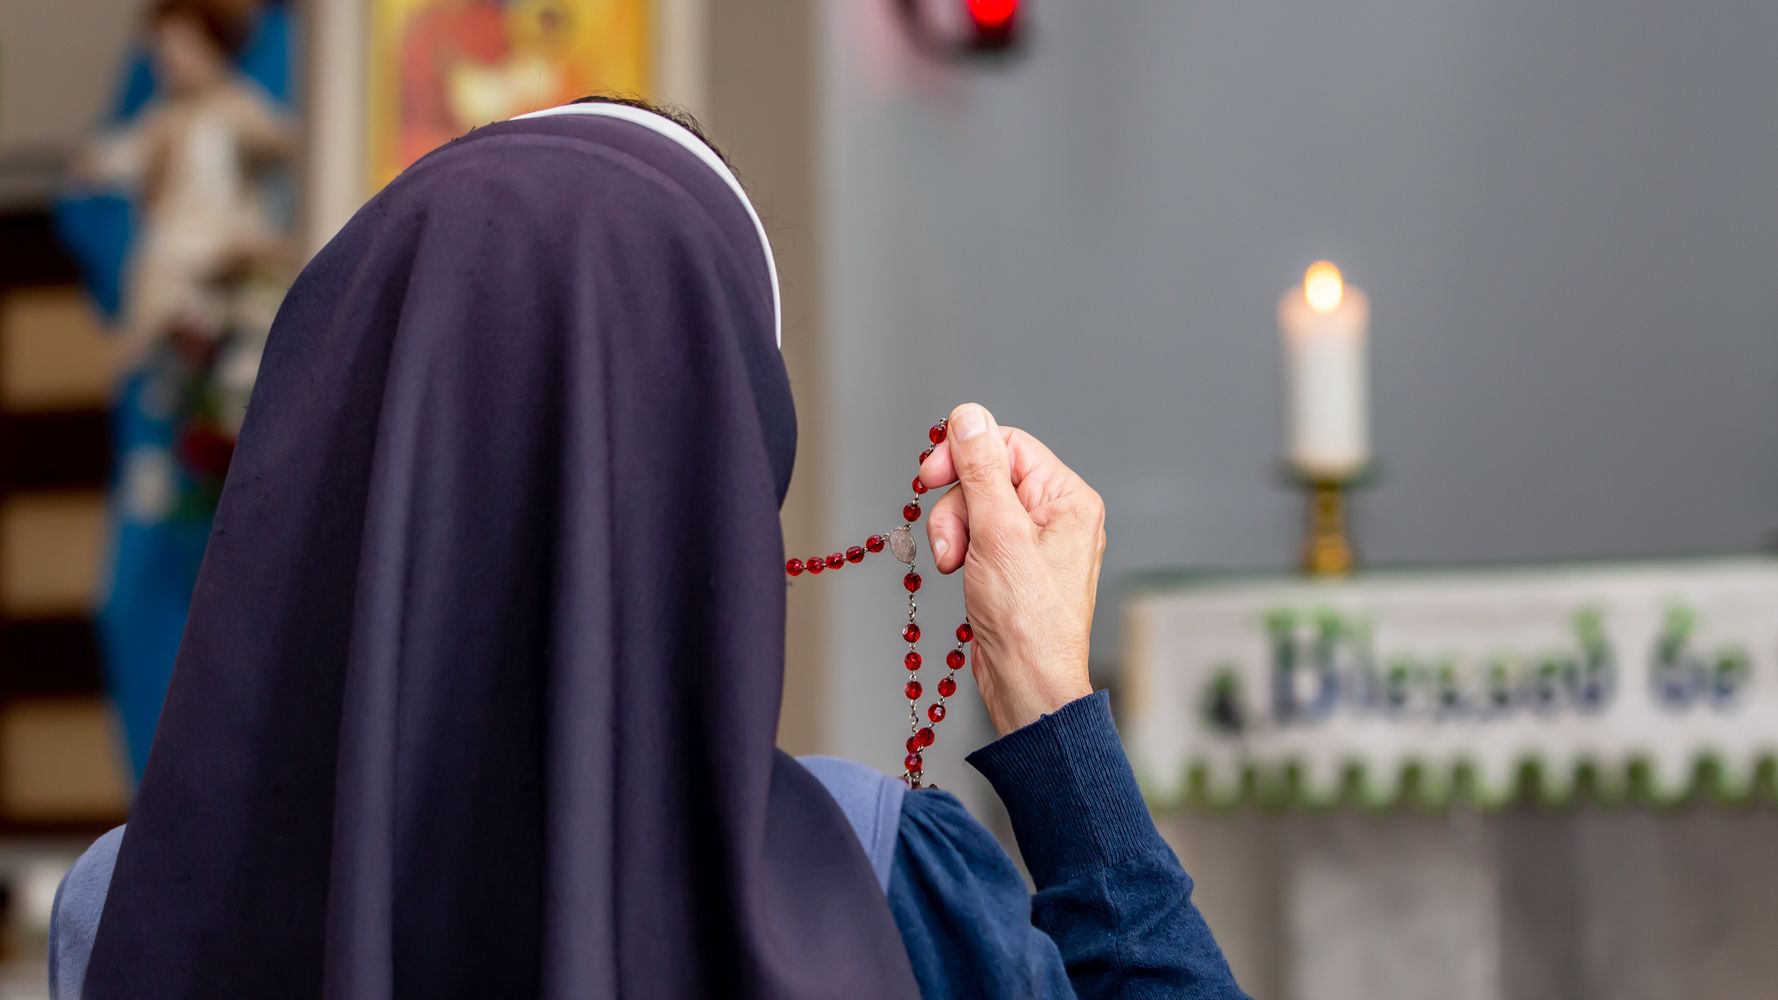 French Officials Defend Nun Who Was Told Her Religious Attire Violated